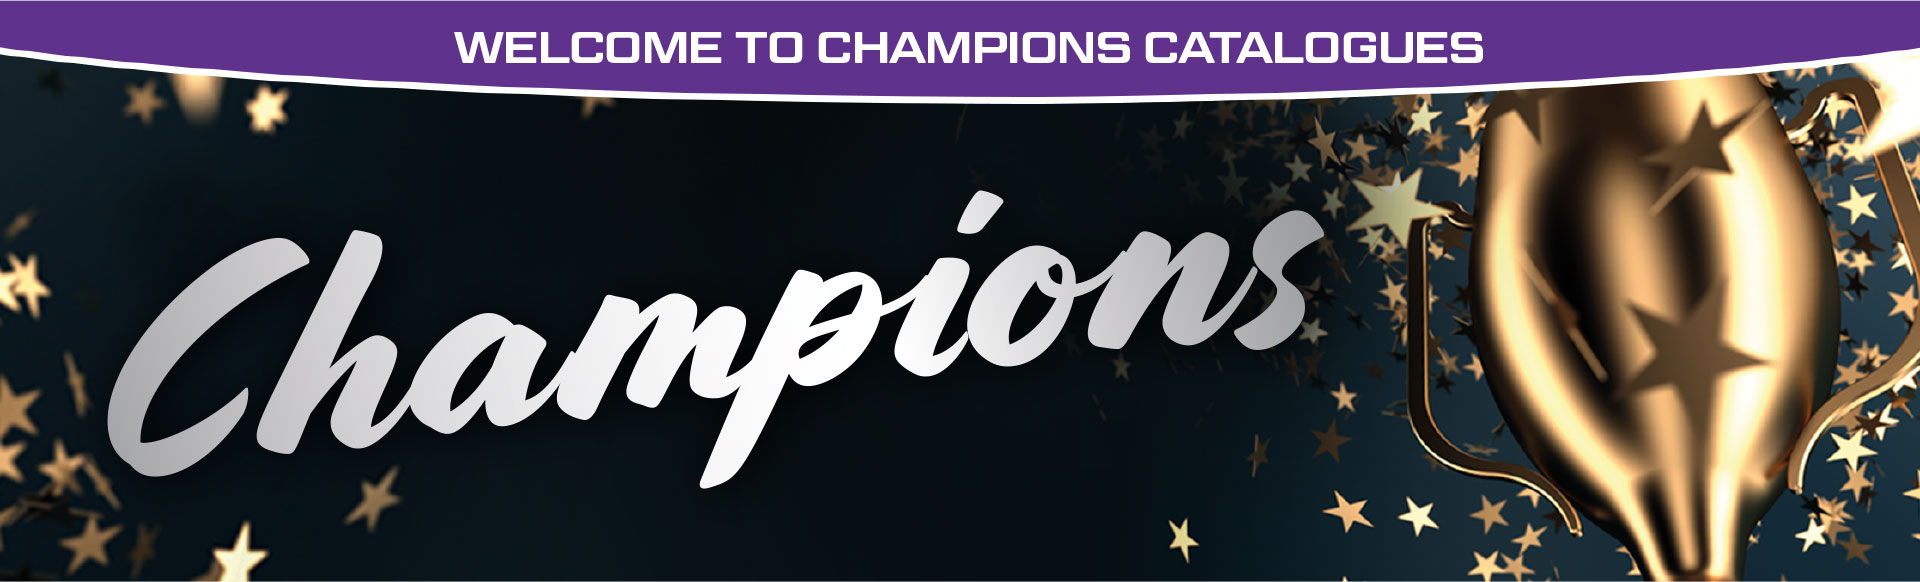 Welcome to the Champions Catalogue